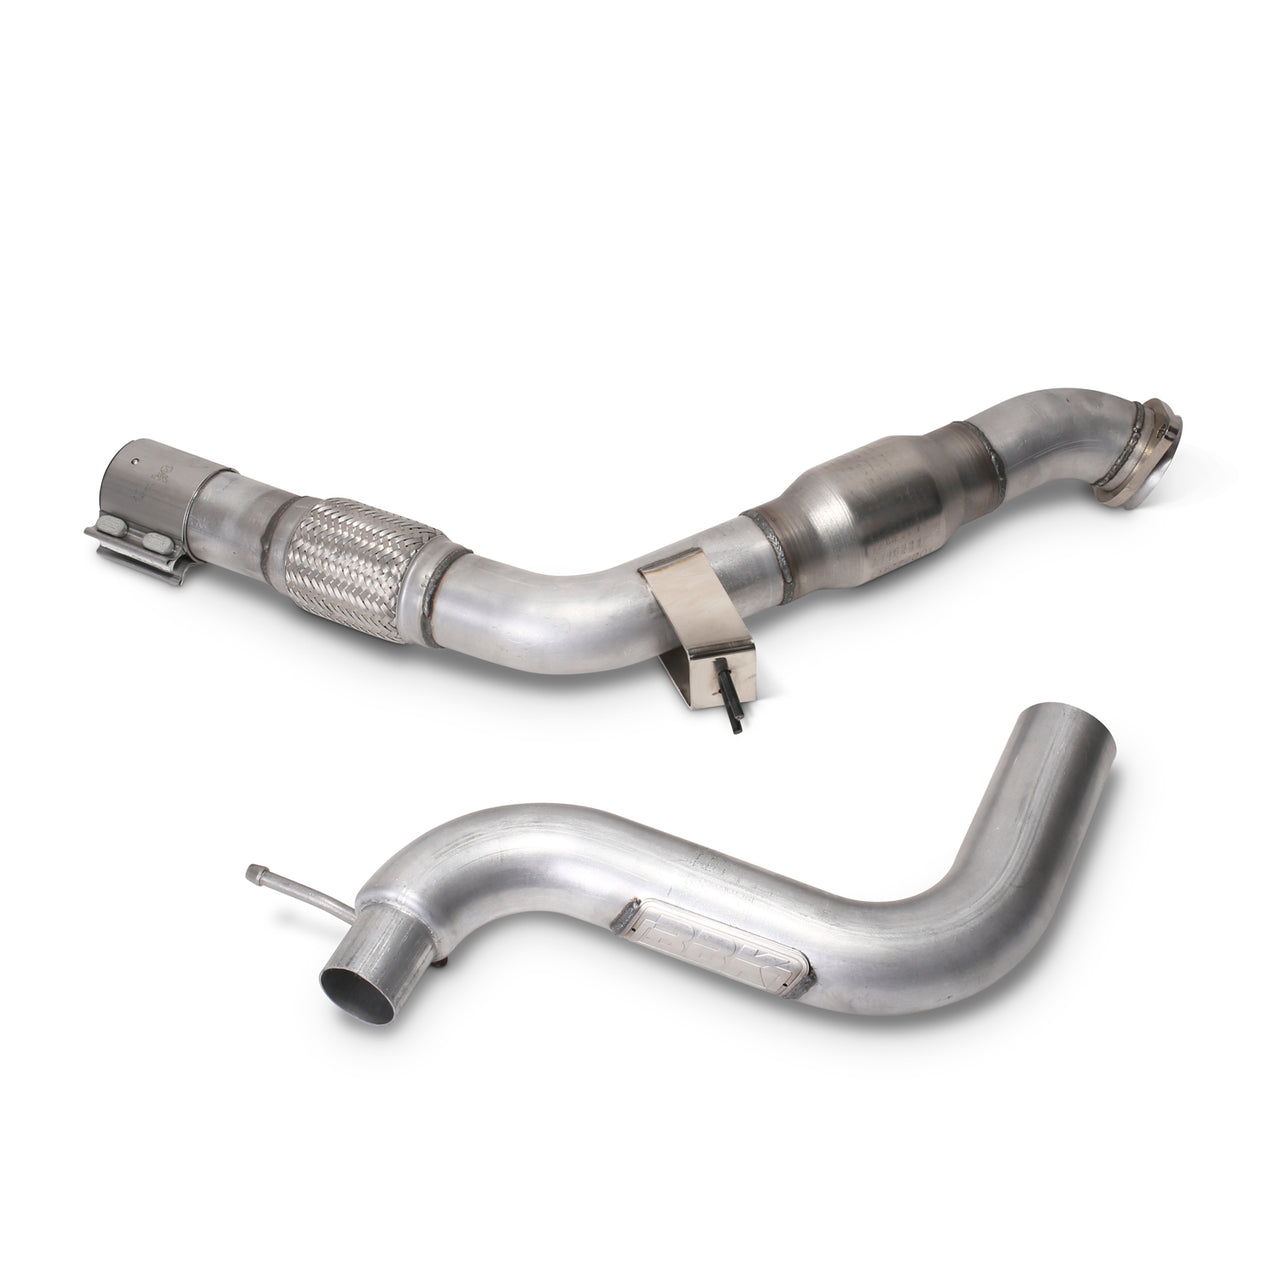 2015-17 MUSTANG ECOBOOST 3" HIGH FLOW CATTED DOWN PIPE